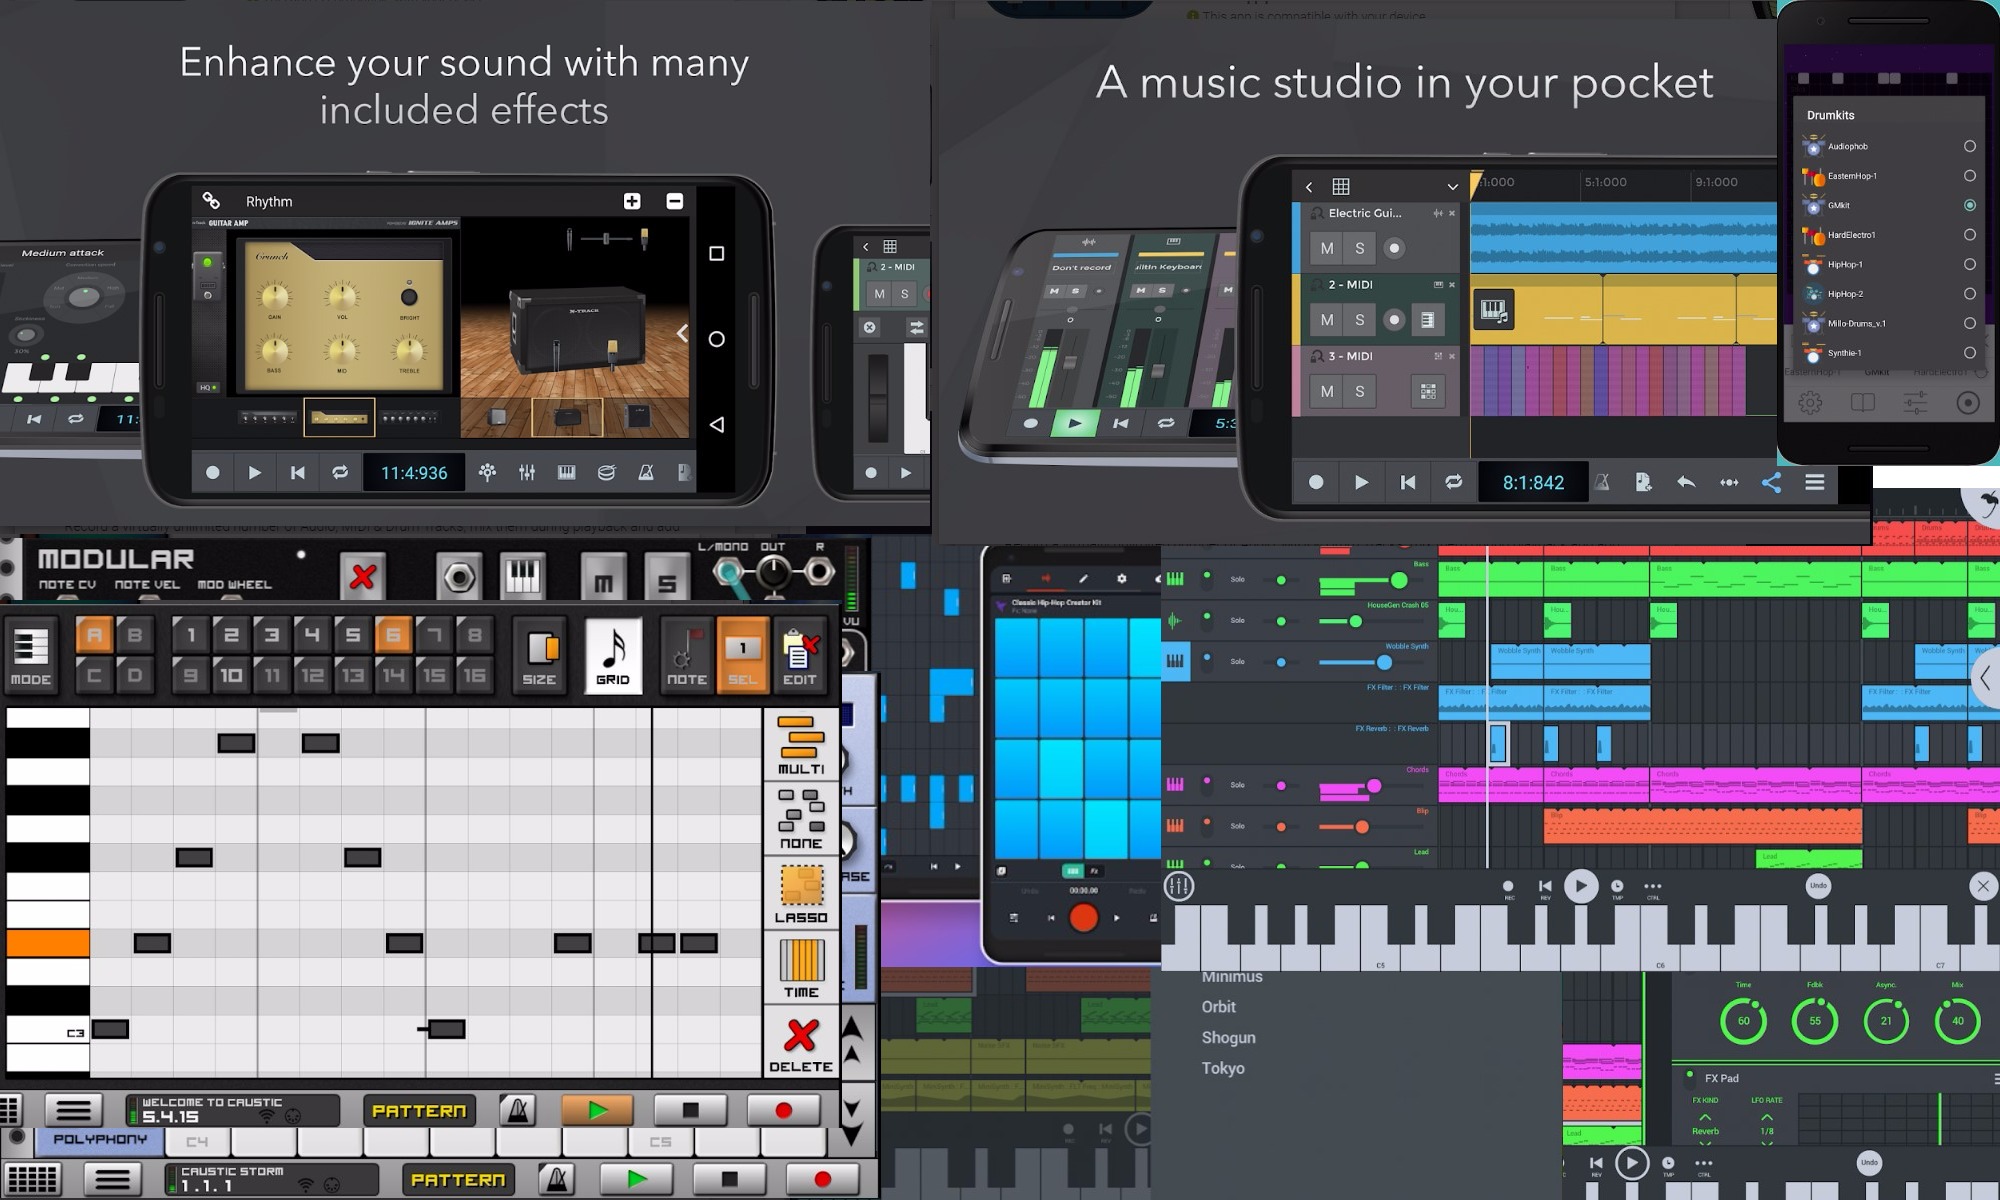 Exclusivemusicplus » 5 Beat Apps For Mobile [iPhone & Android] |